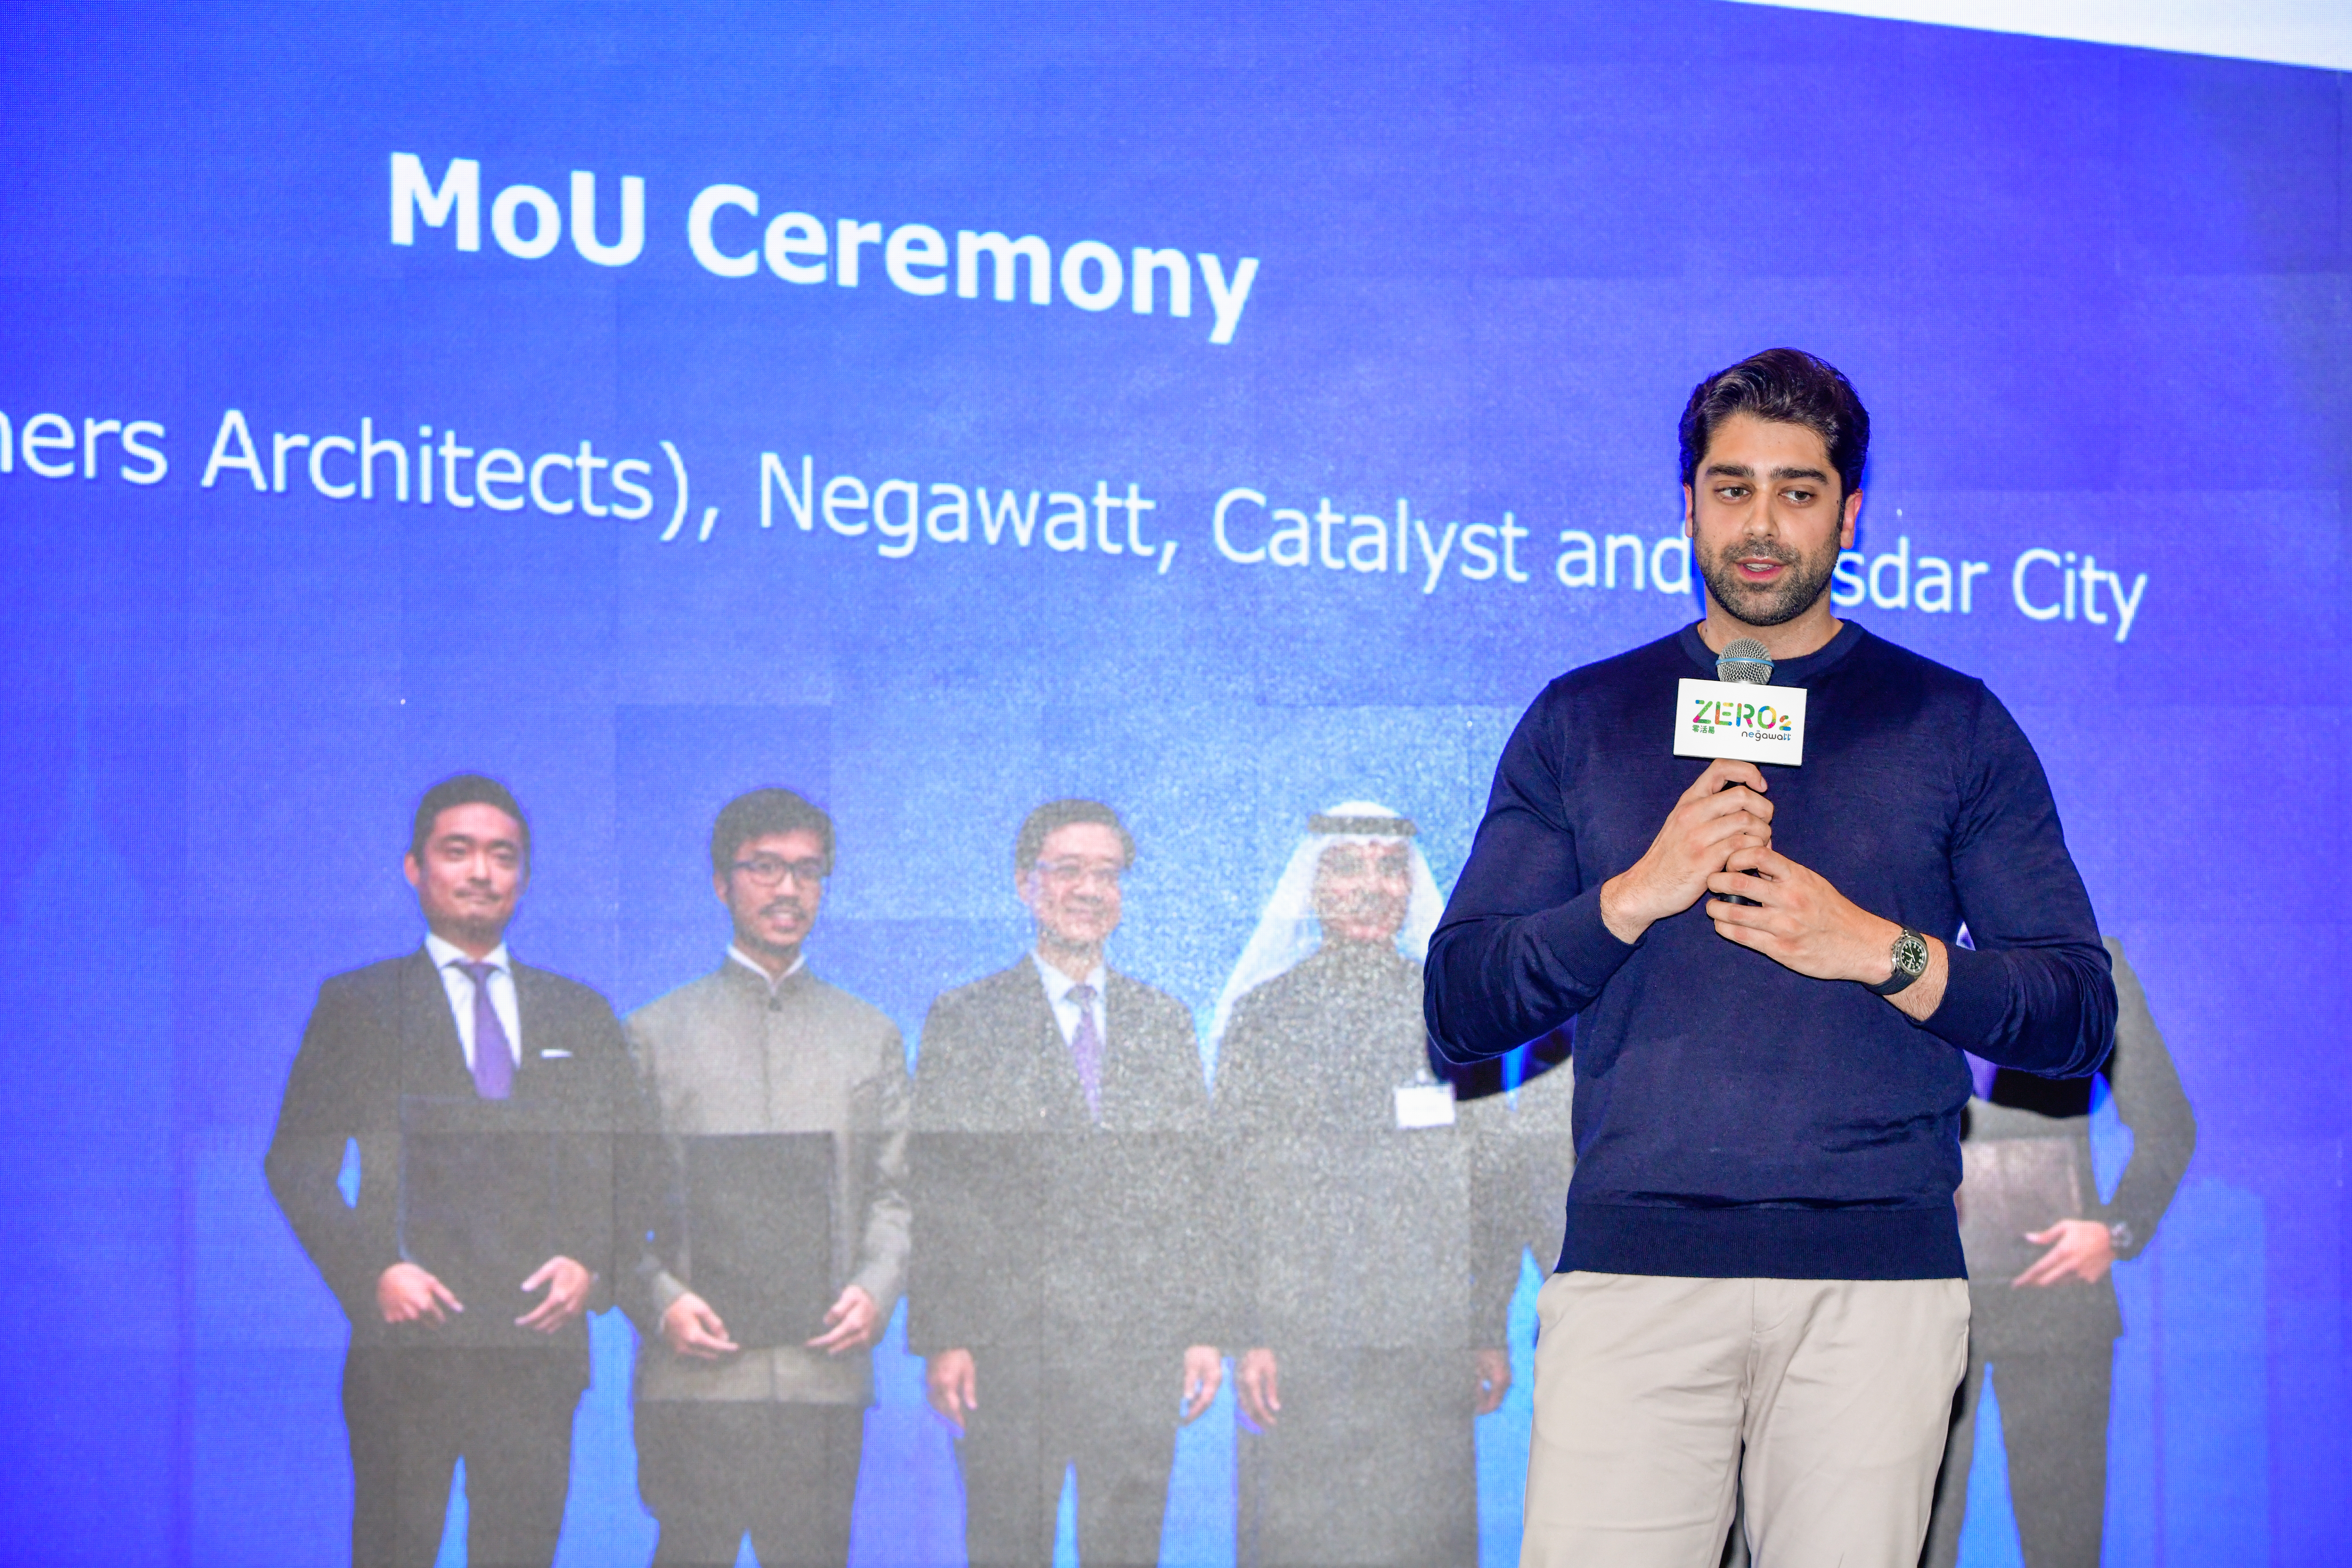 Mr. Suleiman Ali Amin, the CEO of CATALYST Company in Masdar City, took the stage to share the memorandum of understanding signed with Negawatt in Dubai in February. Chief Executive Mr.John Lee and Mr. Nicholas Ho, the CEO of the HPA, were also present to witness the signing.